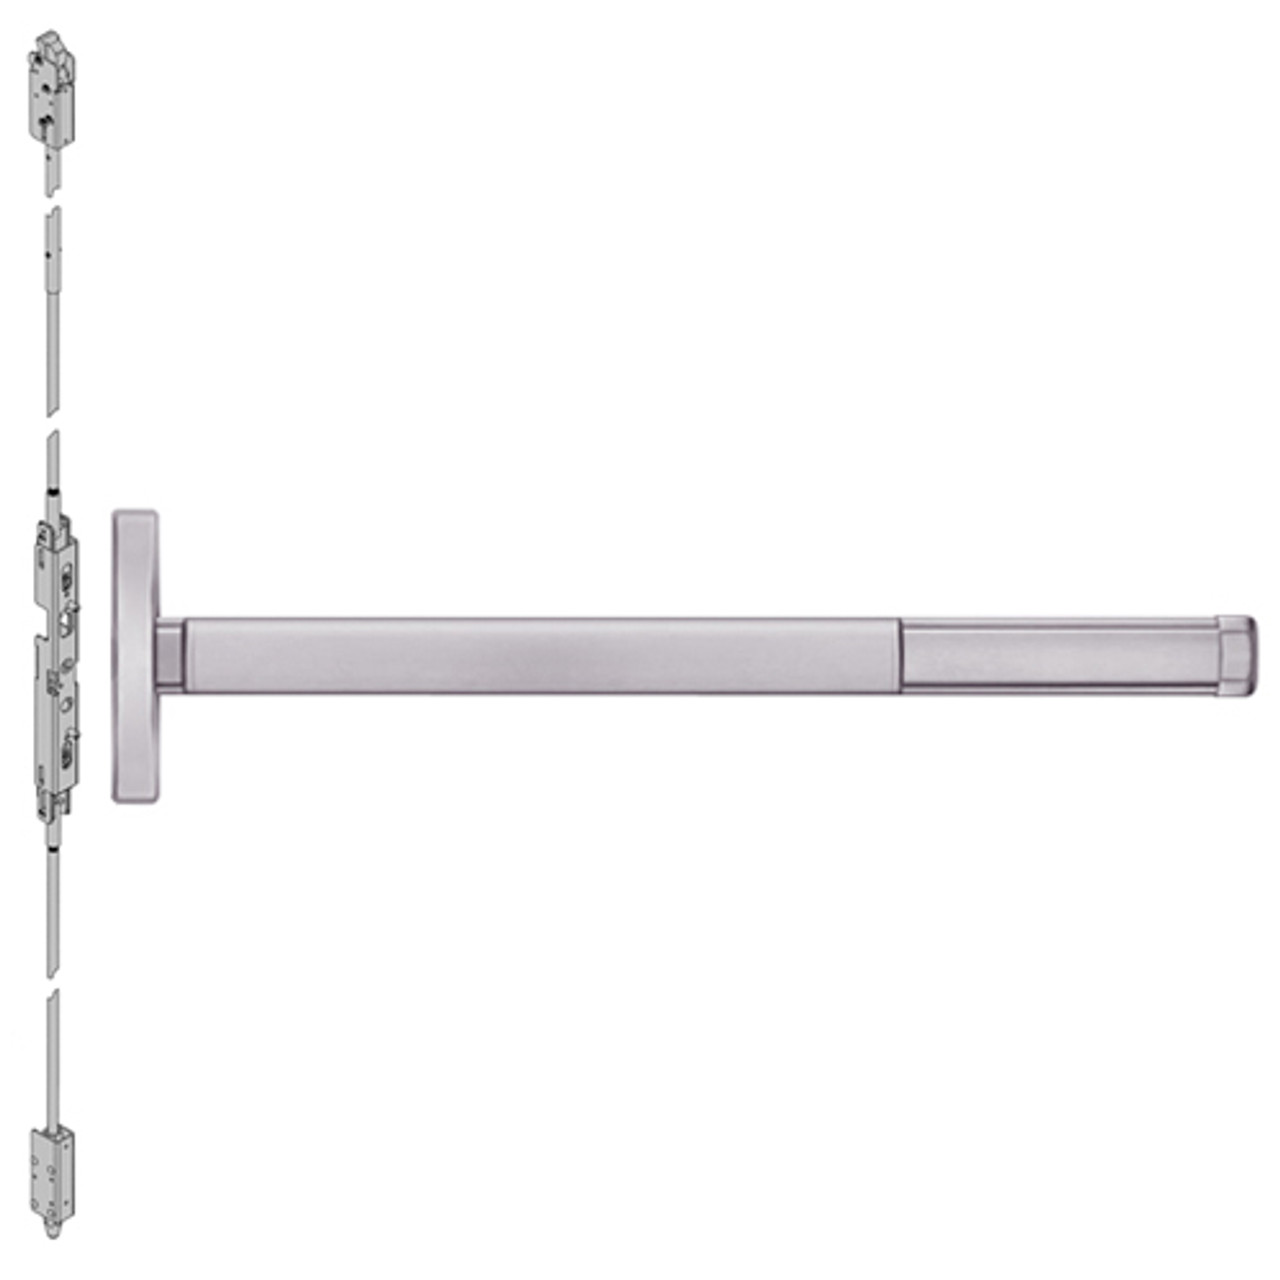 ELRFL2603-630-48 PHI 2600 Series Fire Rated Concealed Vertical Rod Exit Device with Electric Latch Retraction Prepped for Key Retracts Latchbolt in Satin Stainless Steel Finish